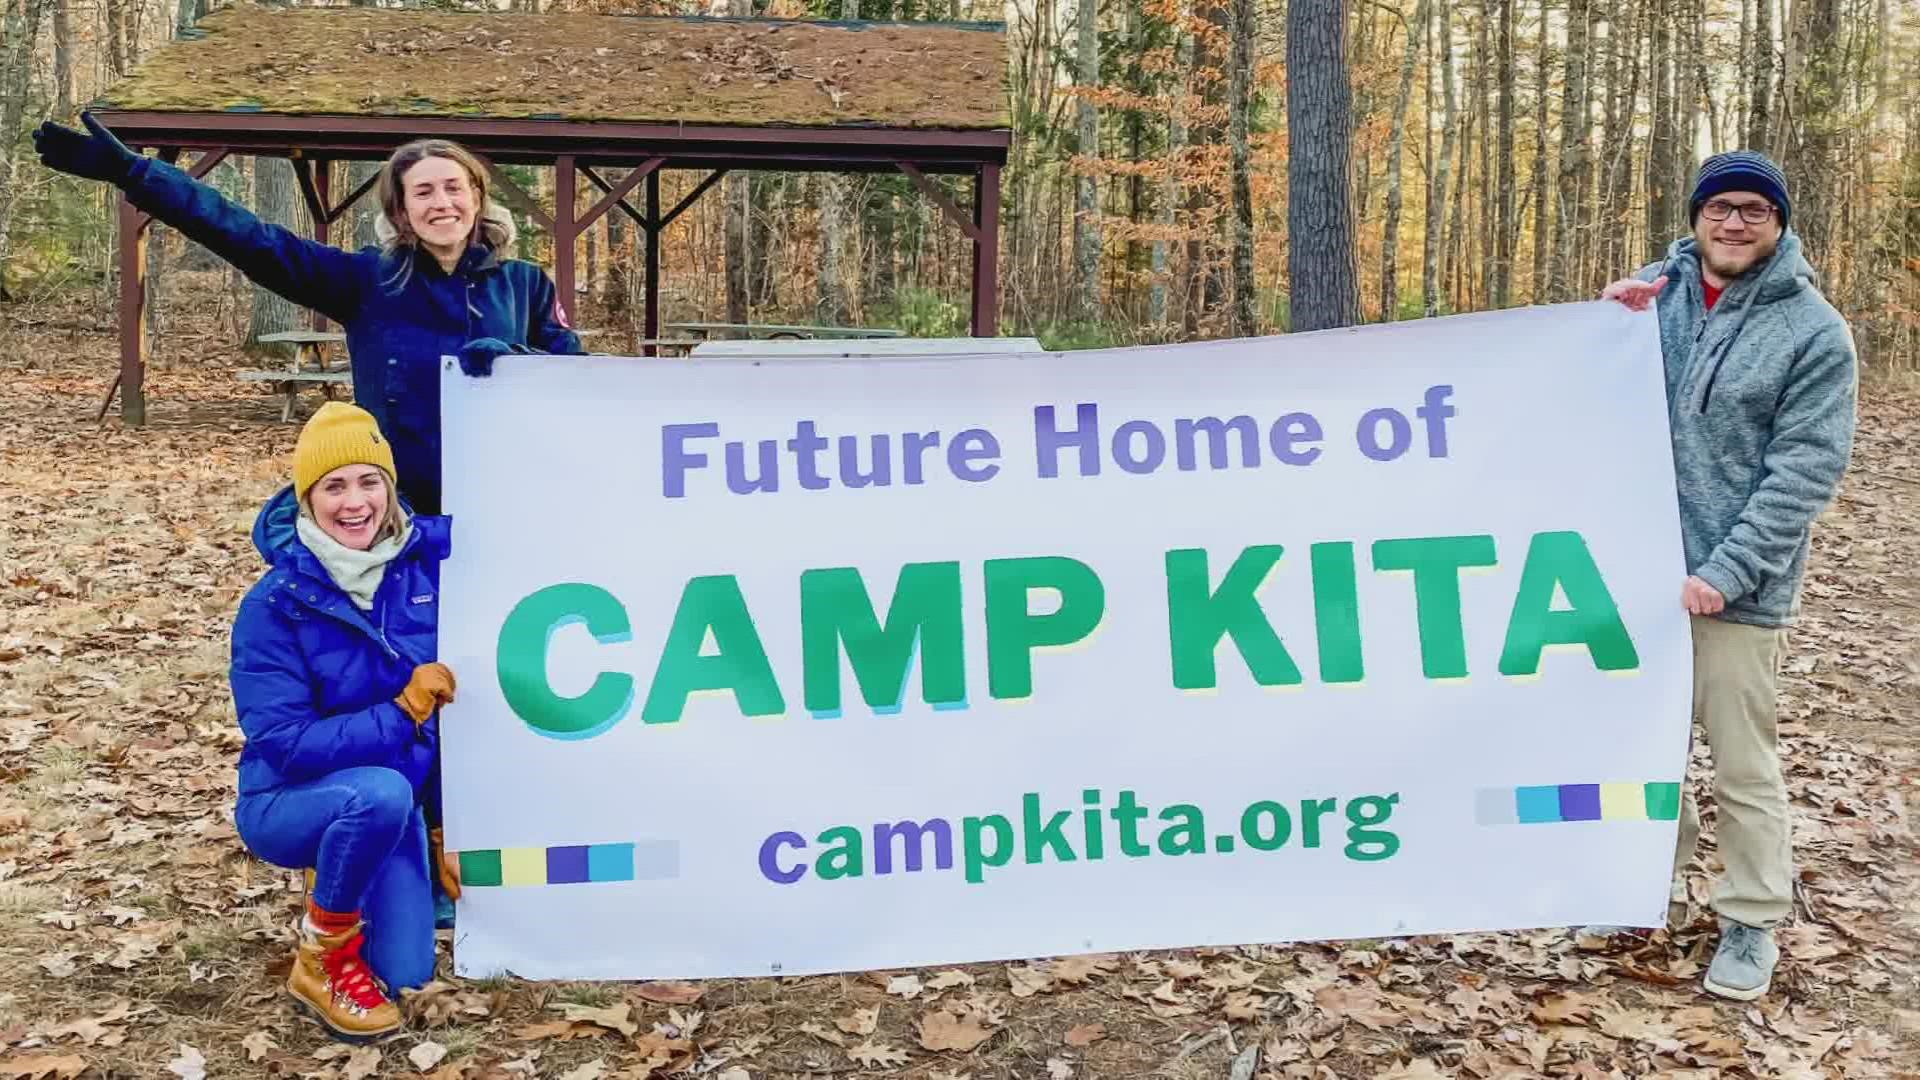 Camp Kita has been renting space around Maine for several years, but now they will have the chance to thrive on their own piece of property.